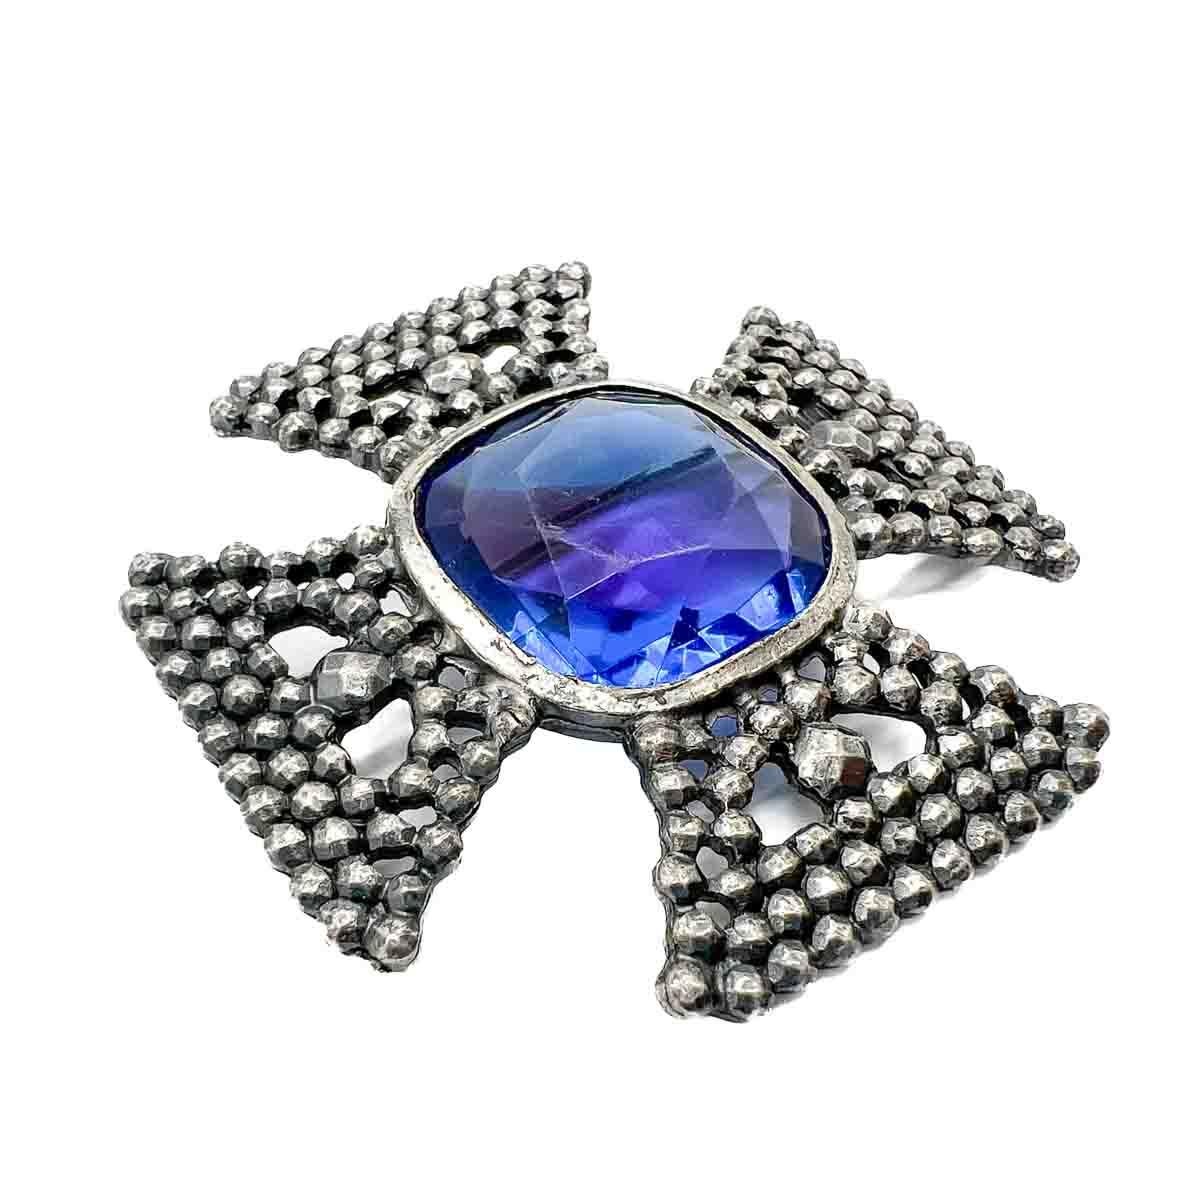 A striking Vintage Accessocraft NYC Cruciform Brooch. An eternally stylish cruciform design adorned with a large stone of sapphire blue with an amethyst flash across the centre, sometimes referred to as a rainbow stone. The setting of the brooch